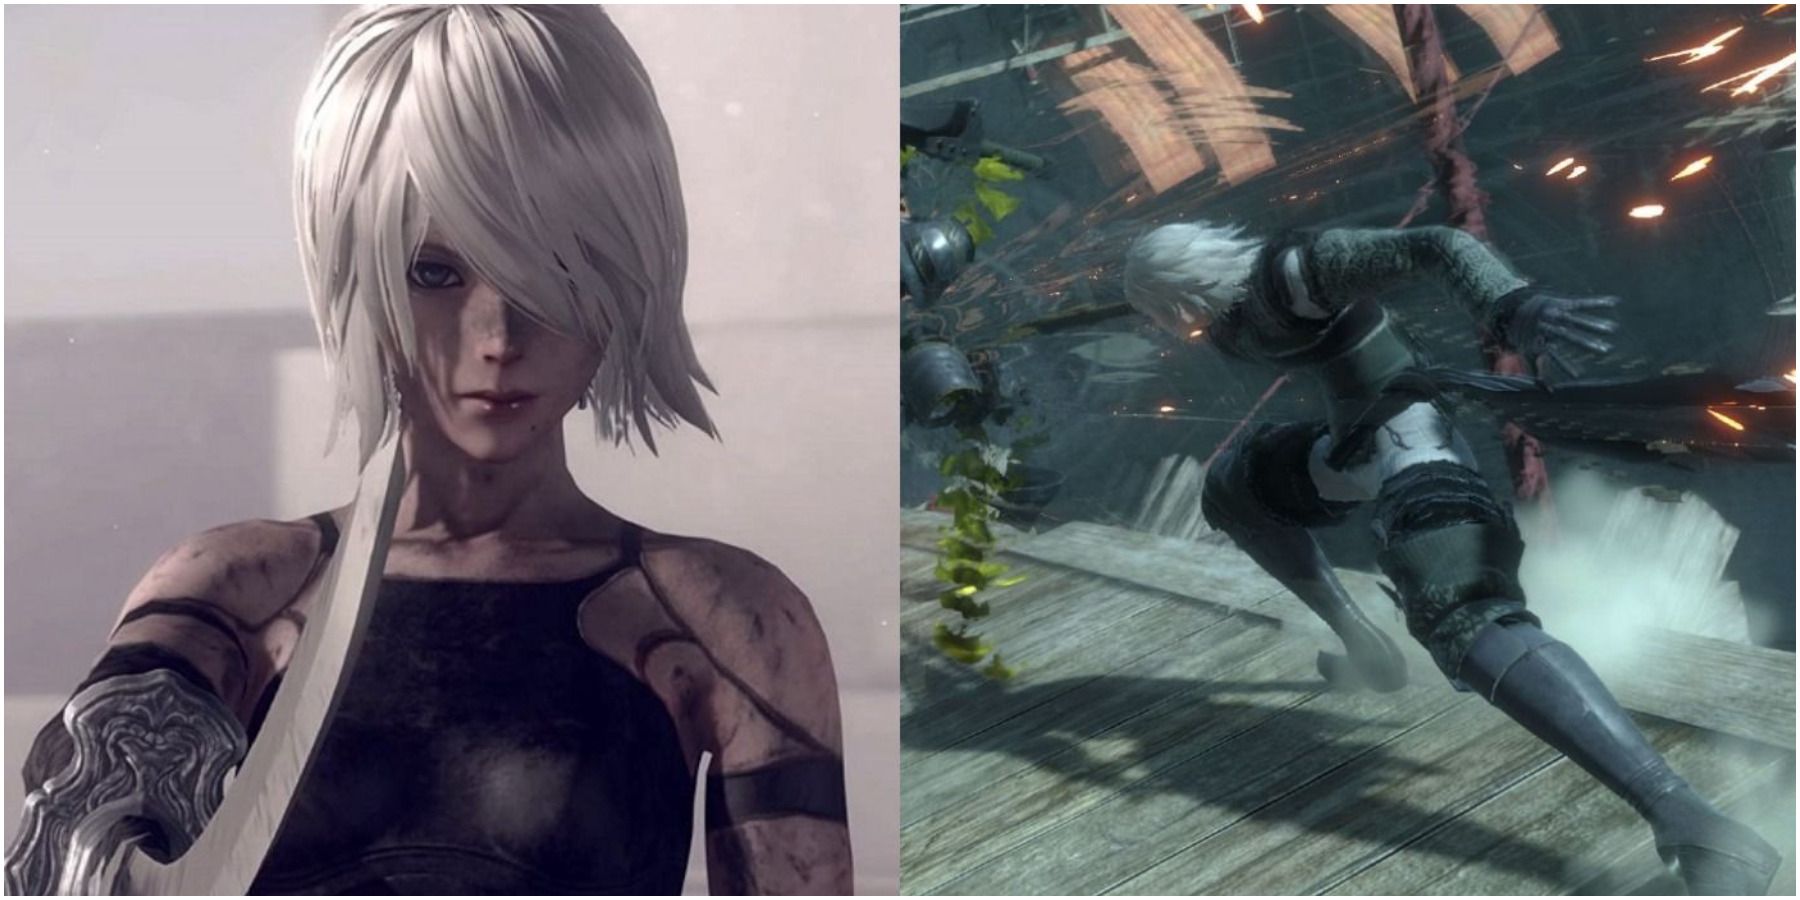 Nier Replicant Vs Nier Automata Which Is The Better Game In The Series